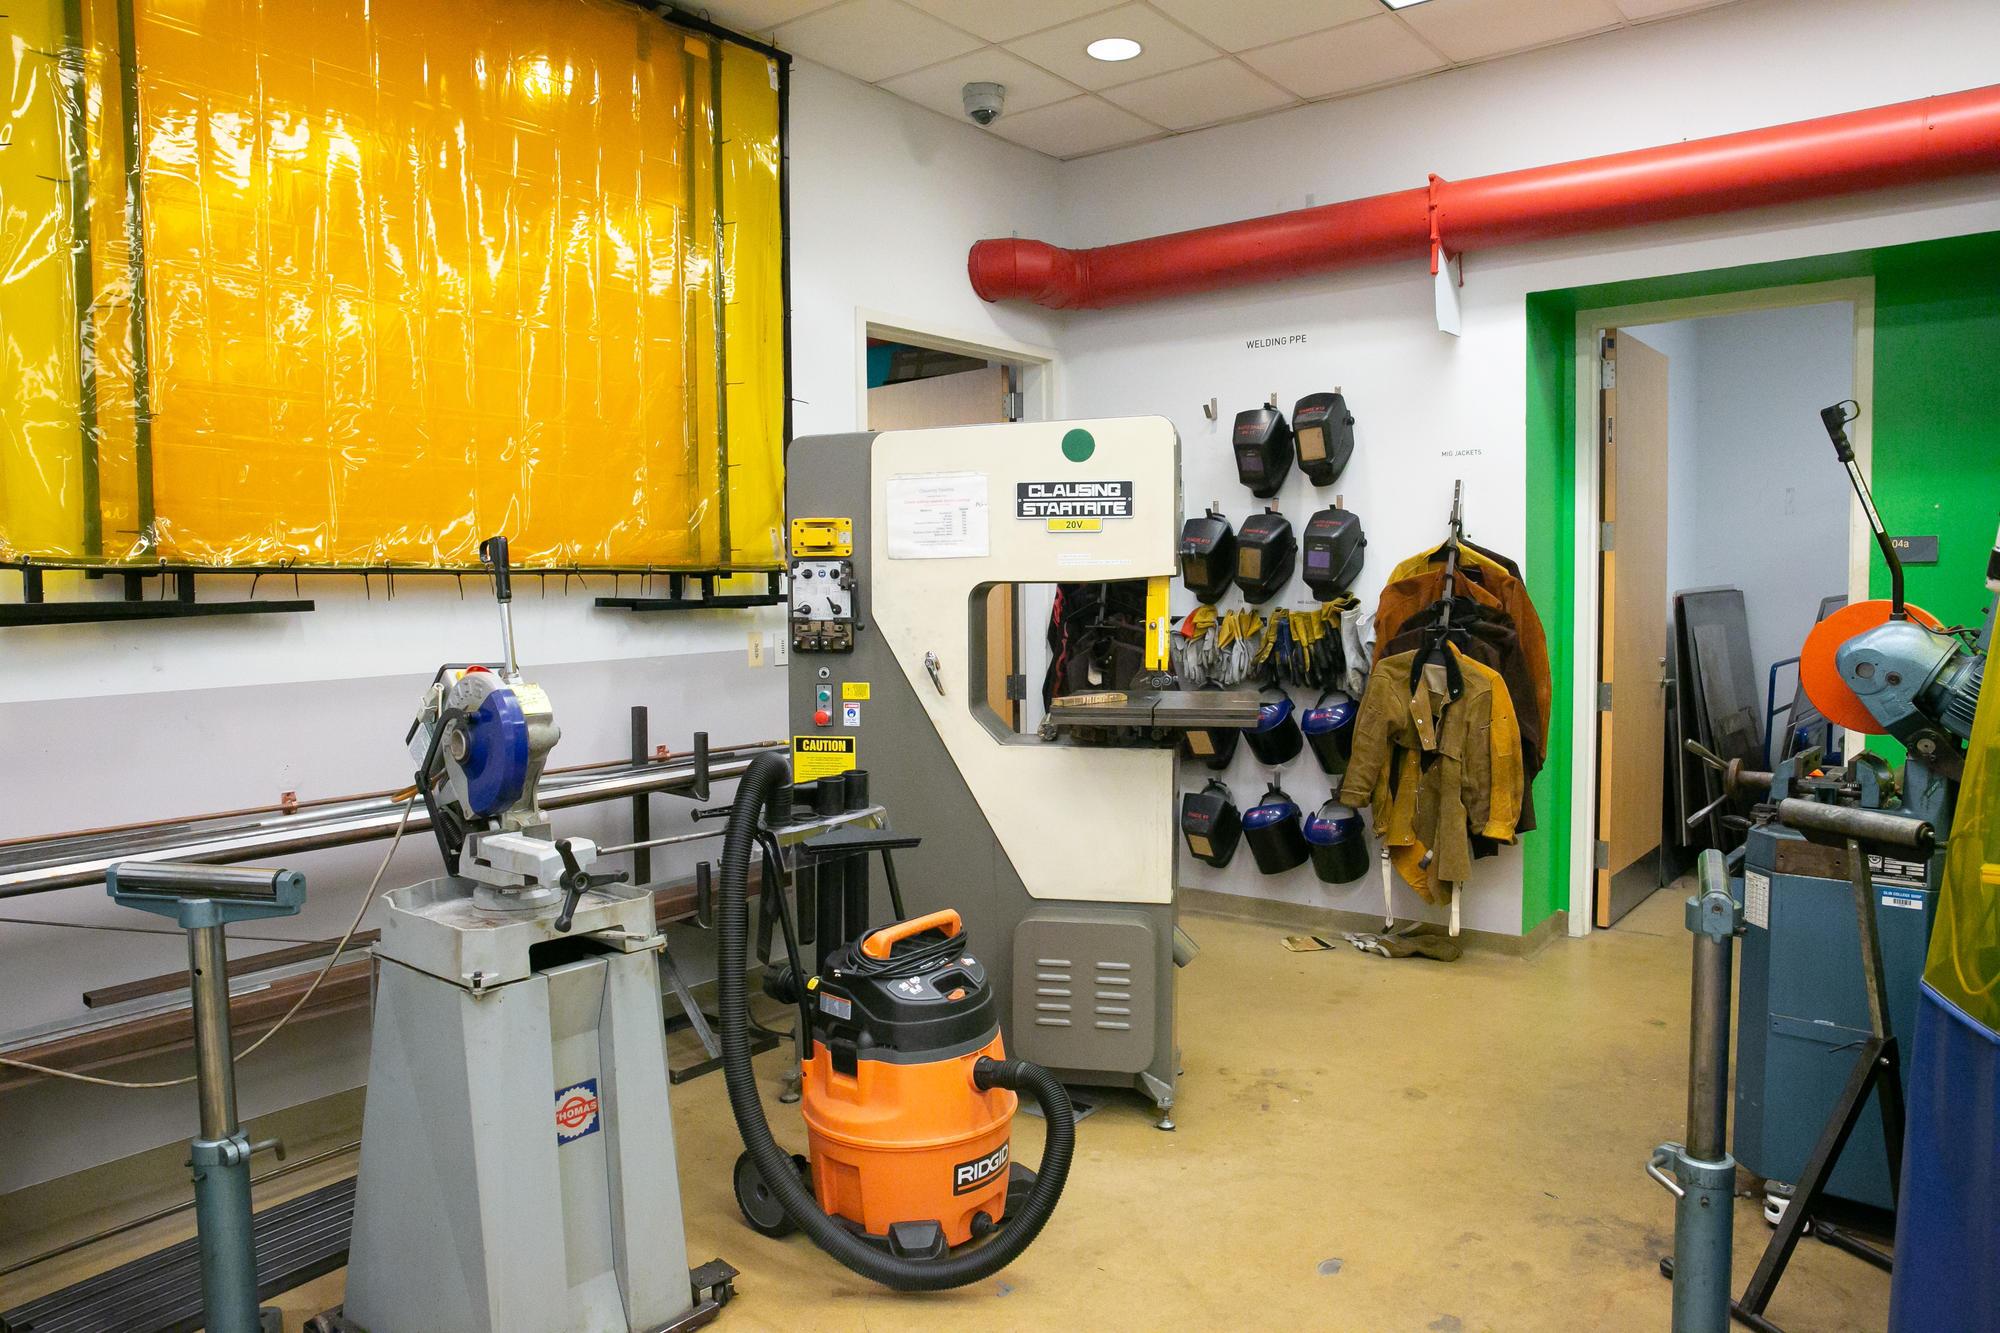 A look inside the Abrasive Room at Olin College